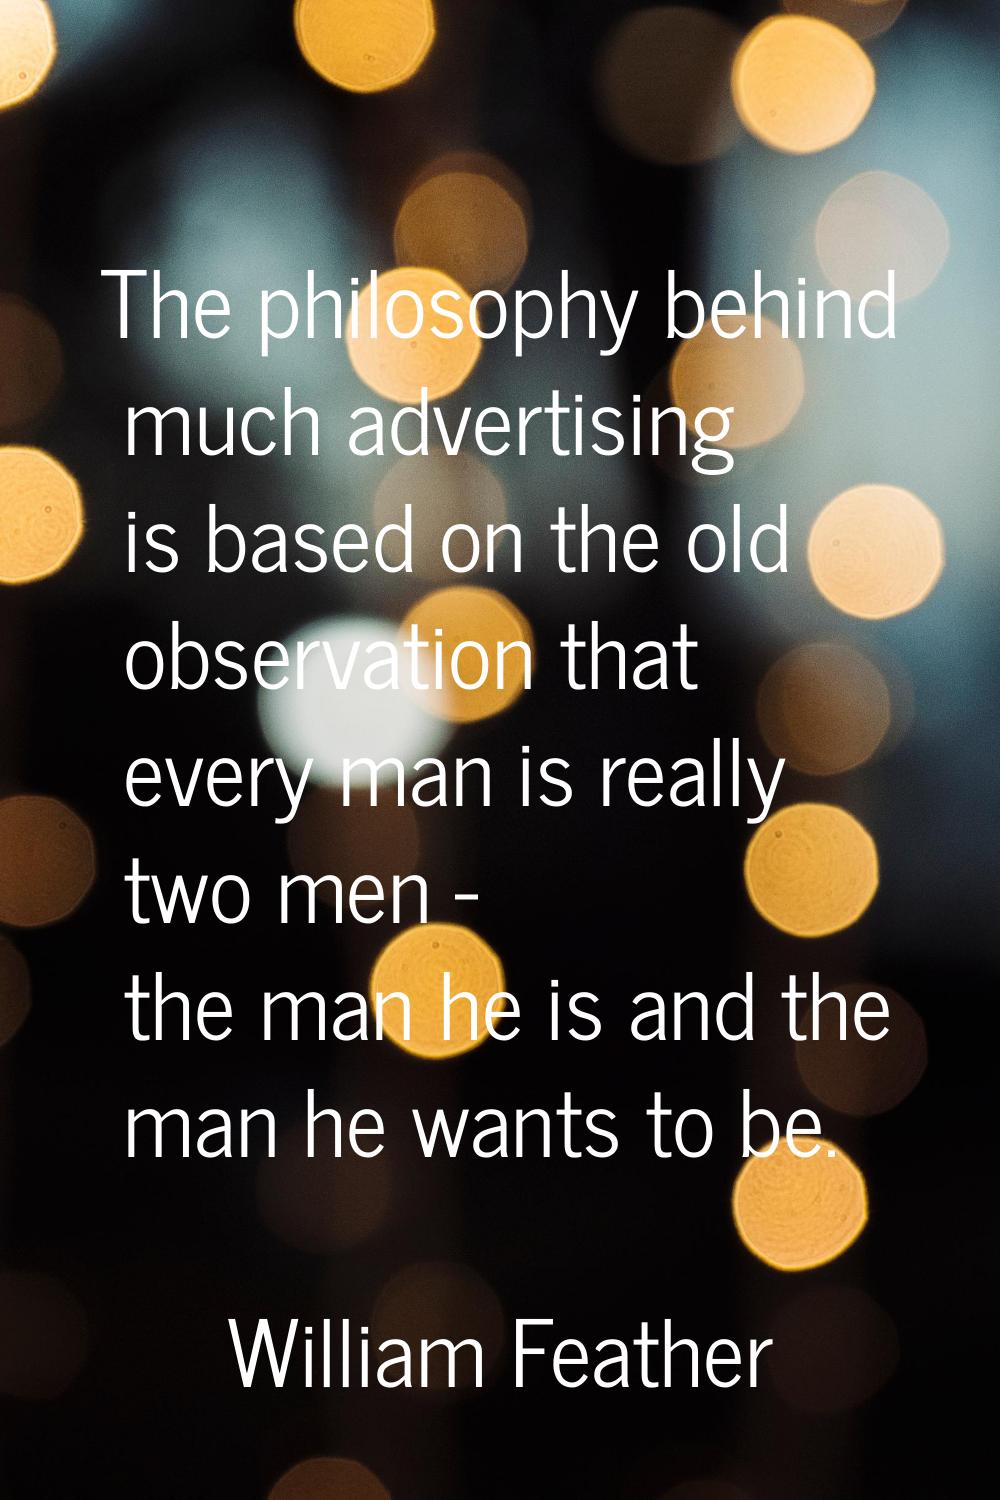 The philosophy behind much advertising is based on the old observation that every man is really two